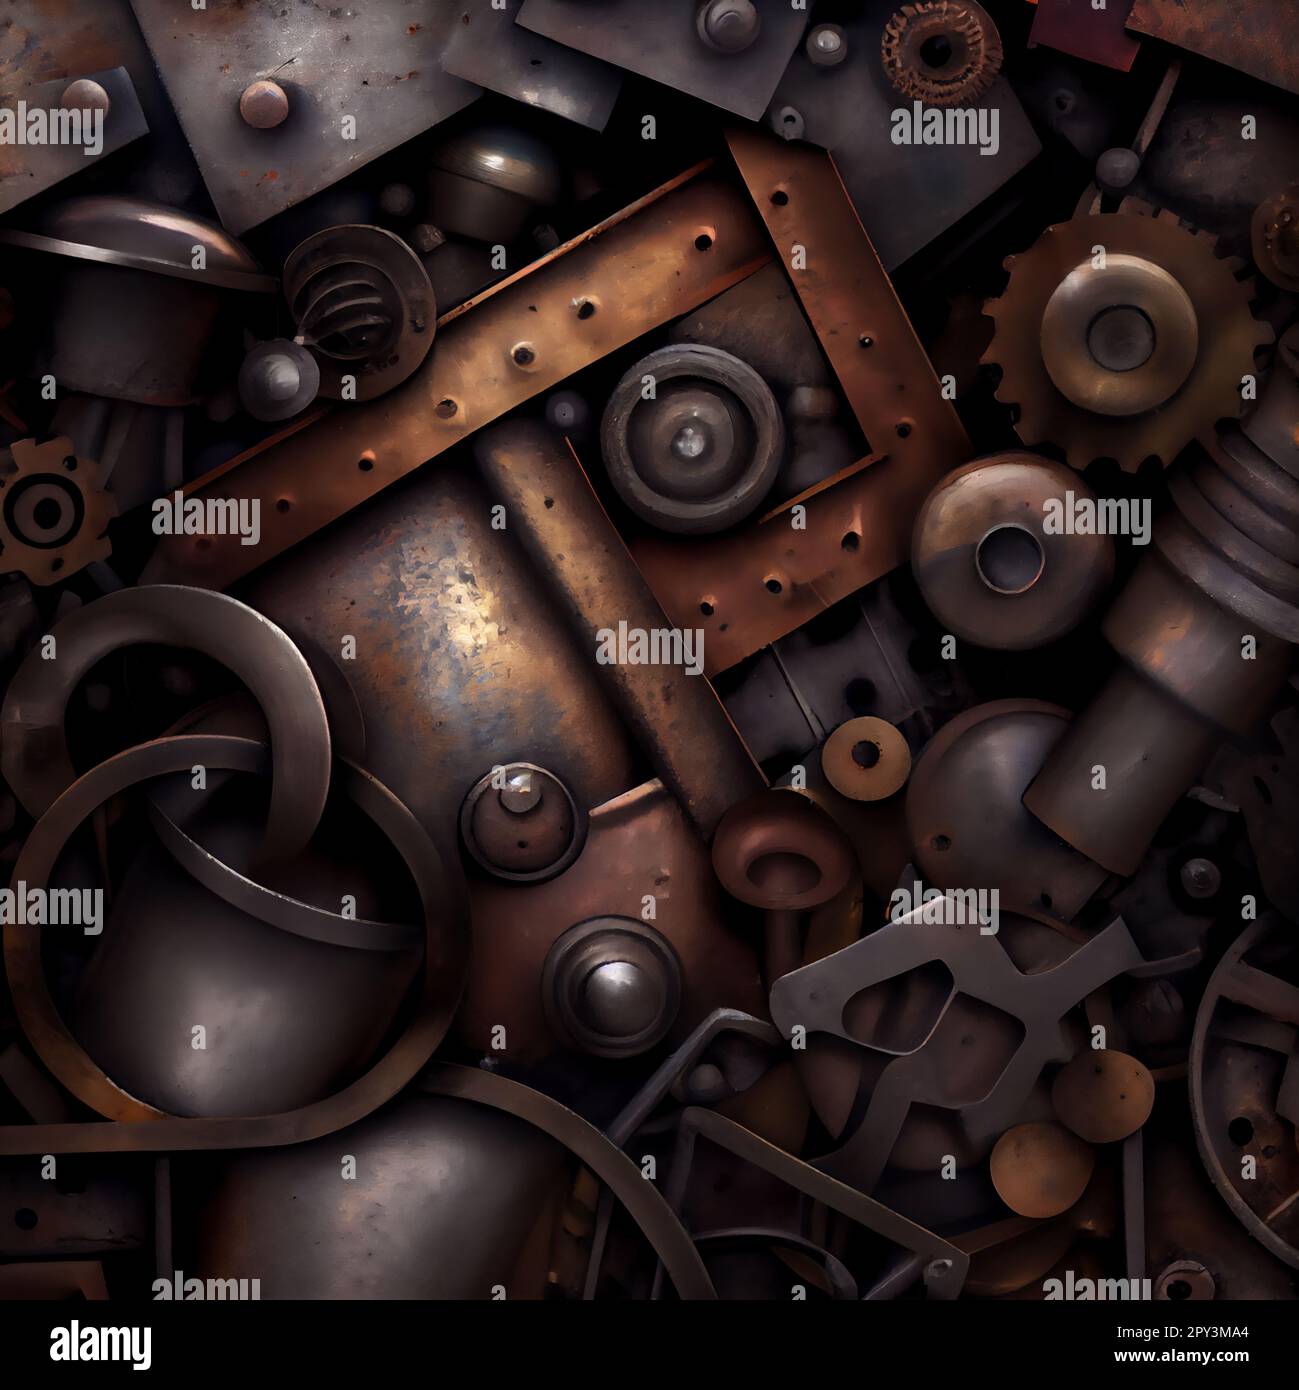 Metal steampunk background with rivets, 3D illustration Stock Photo